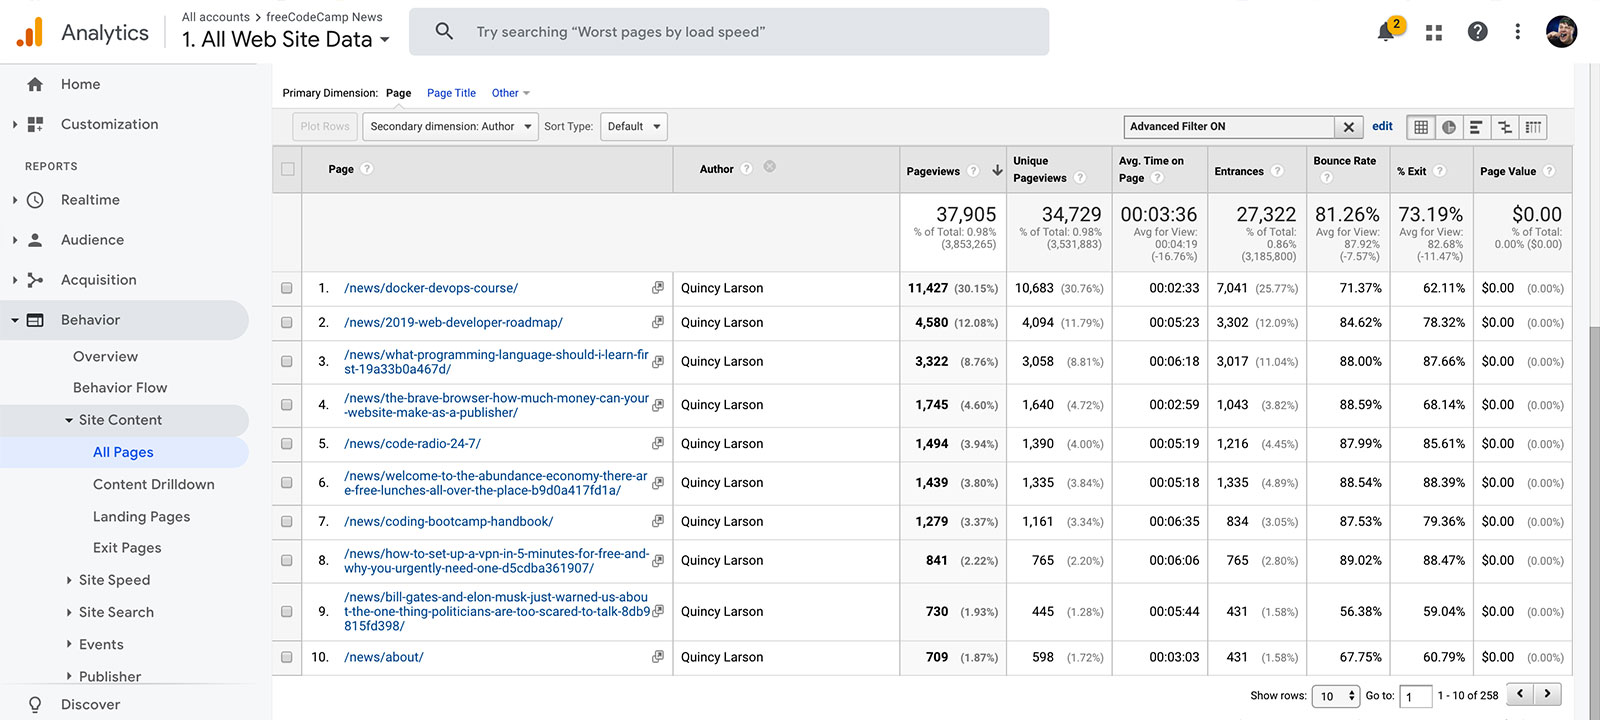 All posts from an Author in Google Analytics Behavior Report